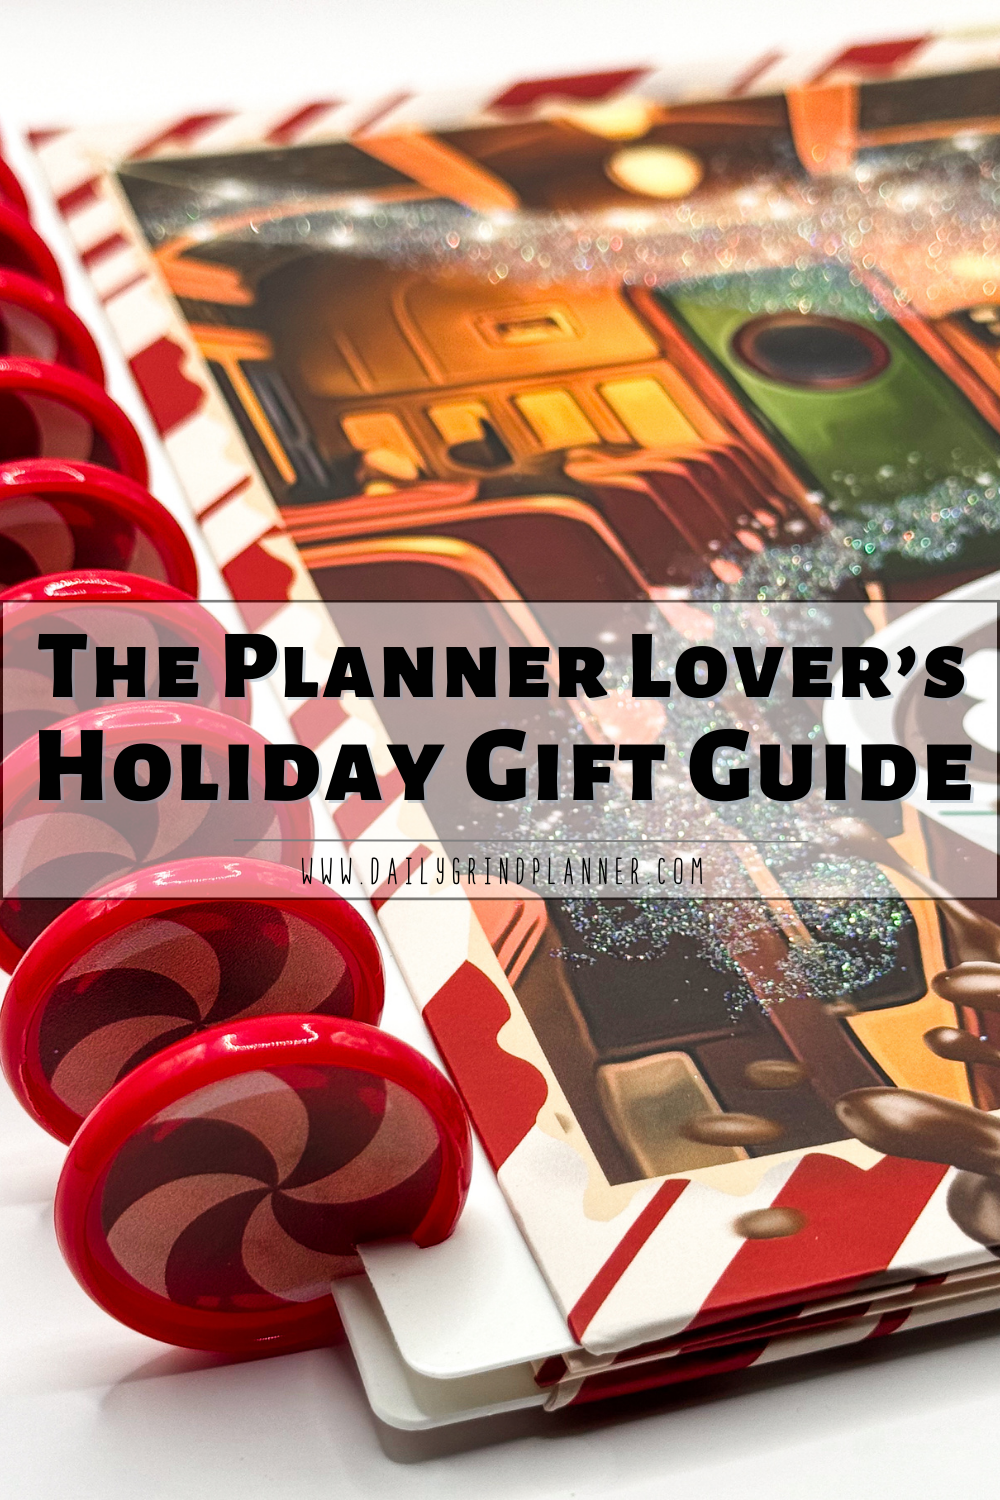 The Planner Lover's Holiday Gift Guide